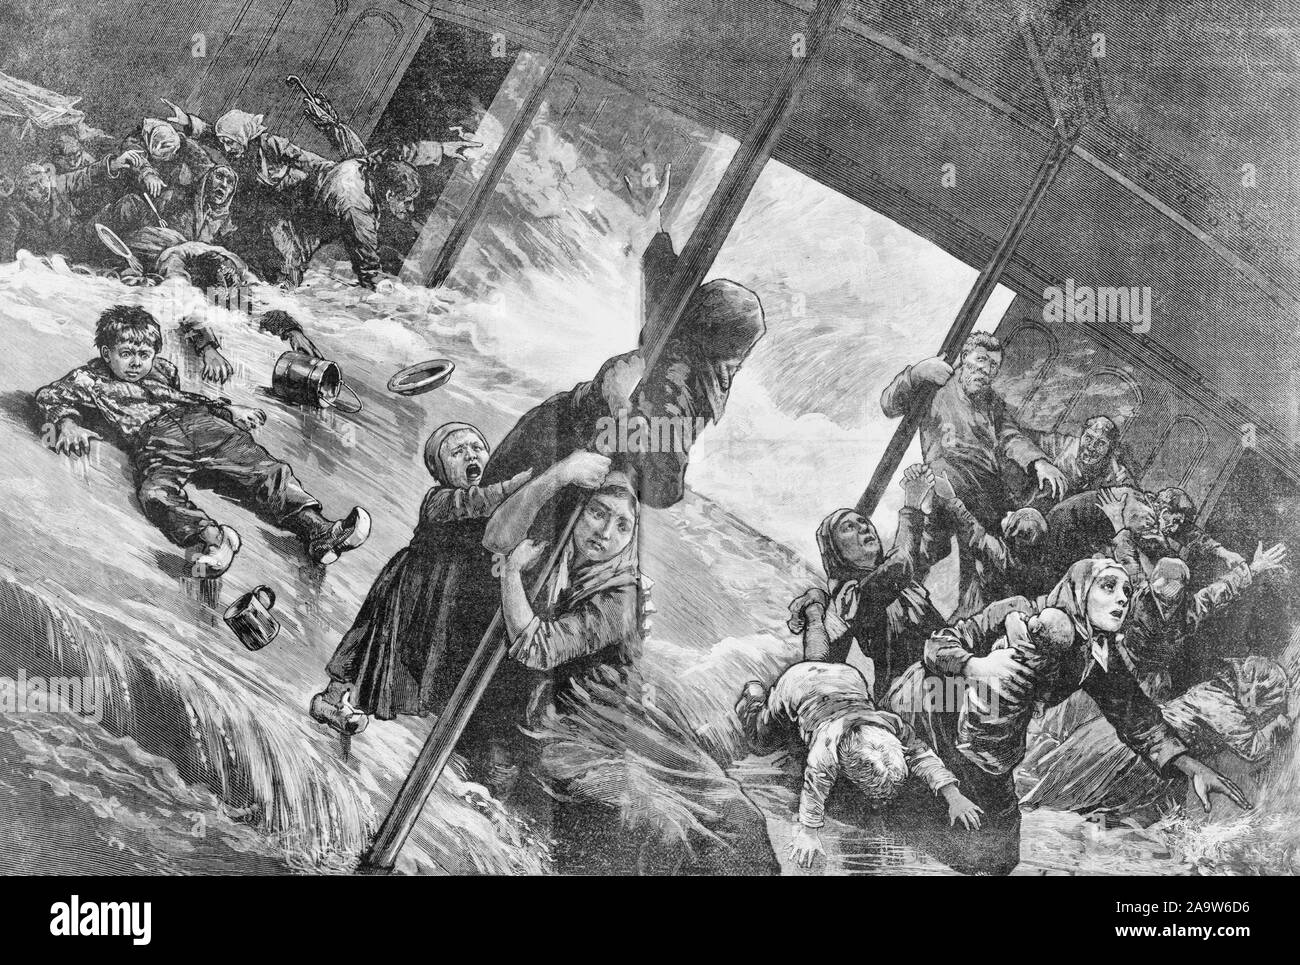 Between decks of an ocean steamer during a storm - Shipping a heavy sea - People sliding on tilting floor of an ocean steamer during a storm, circa 1885 Stock Photo